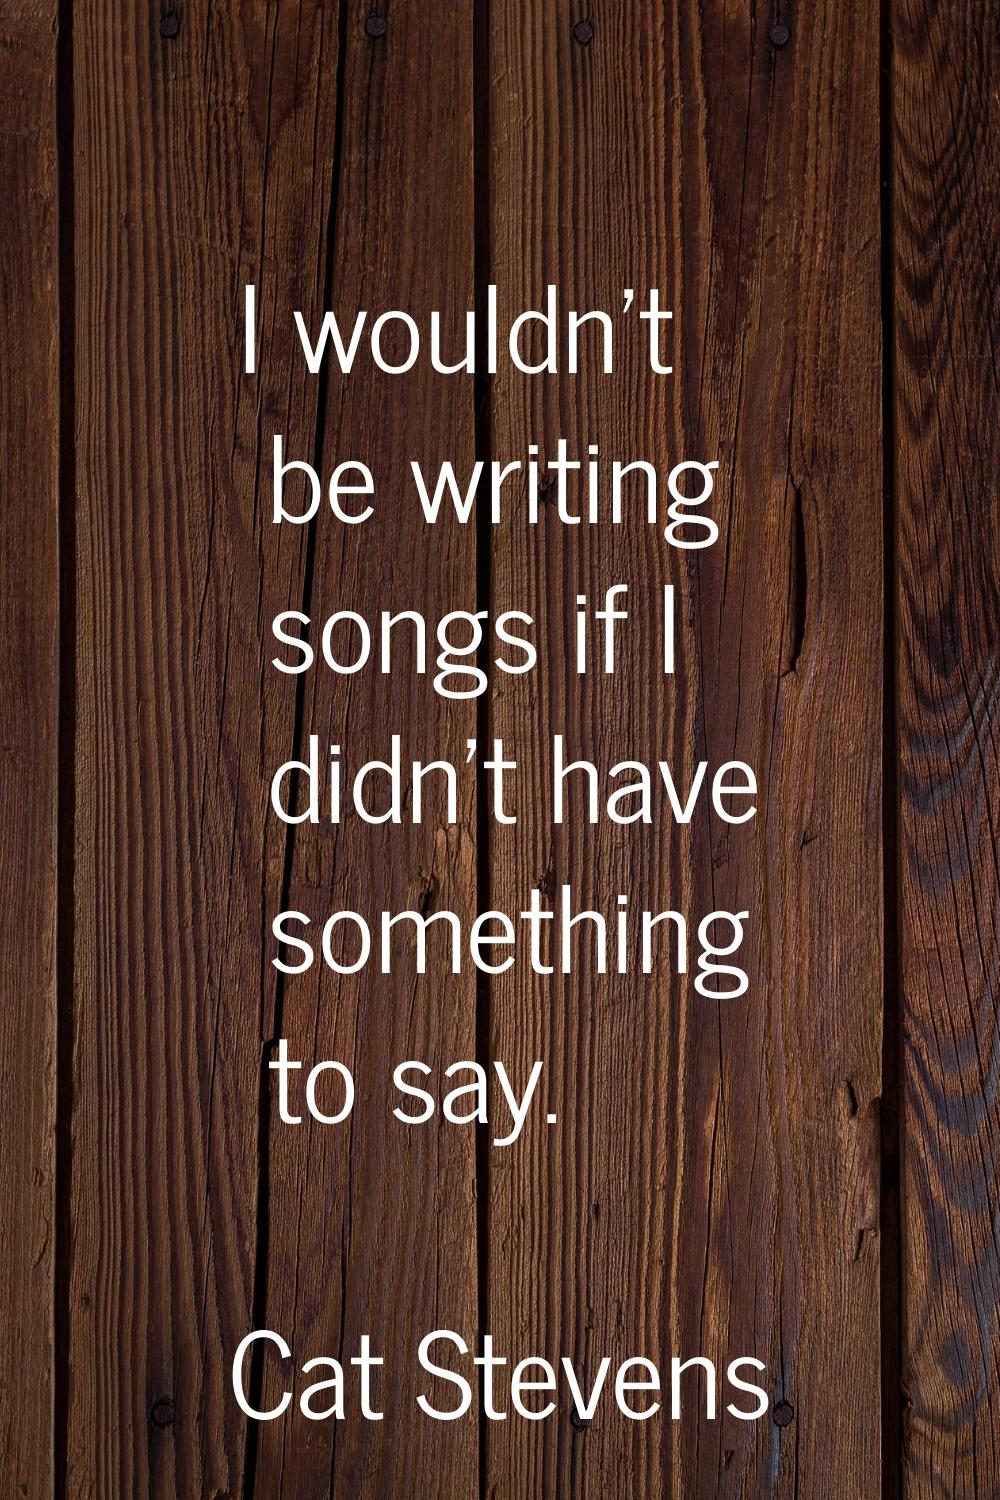 I wouldn't be writing songs if I didn't have something to say.